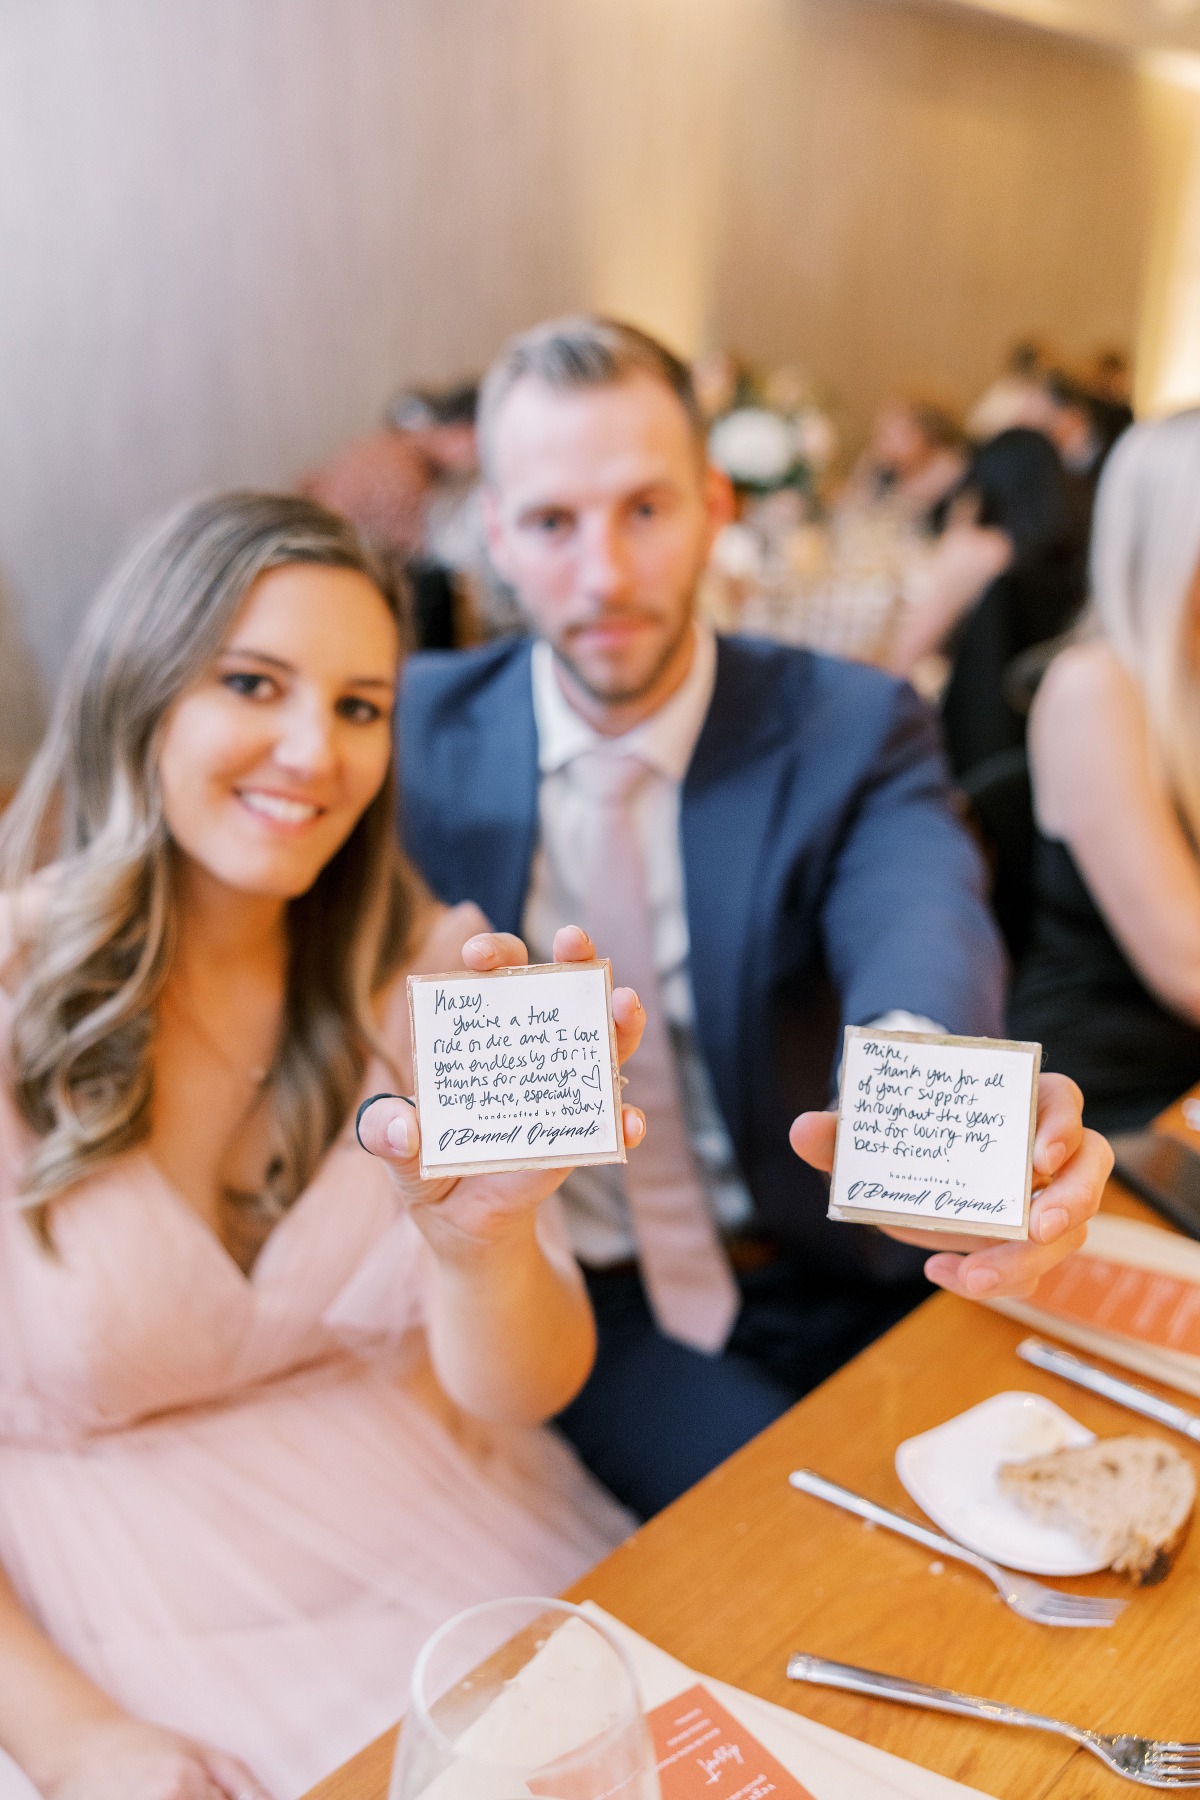 Personalized Notes To Wedding Guests